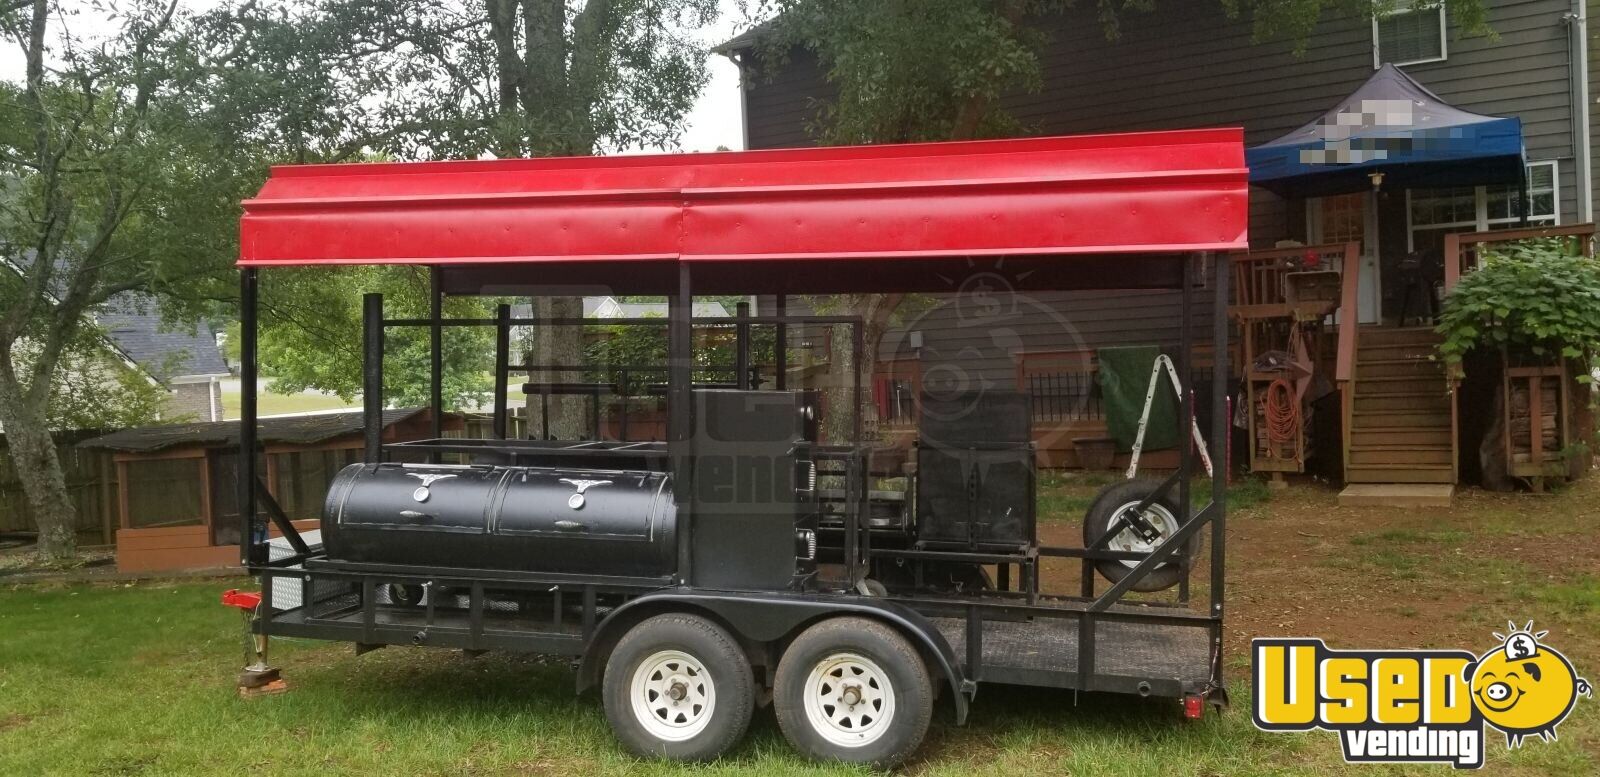 2010 - 7' 16' Open Covered BBQ Smoker Trailer | and BBQ Rig for Sale in Georgia!